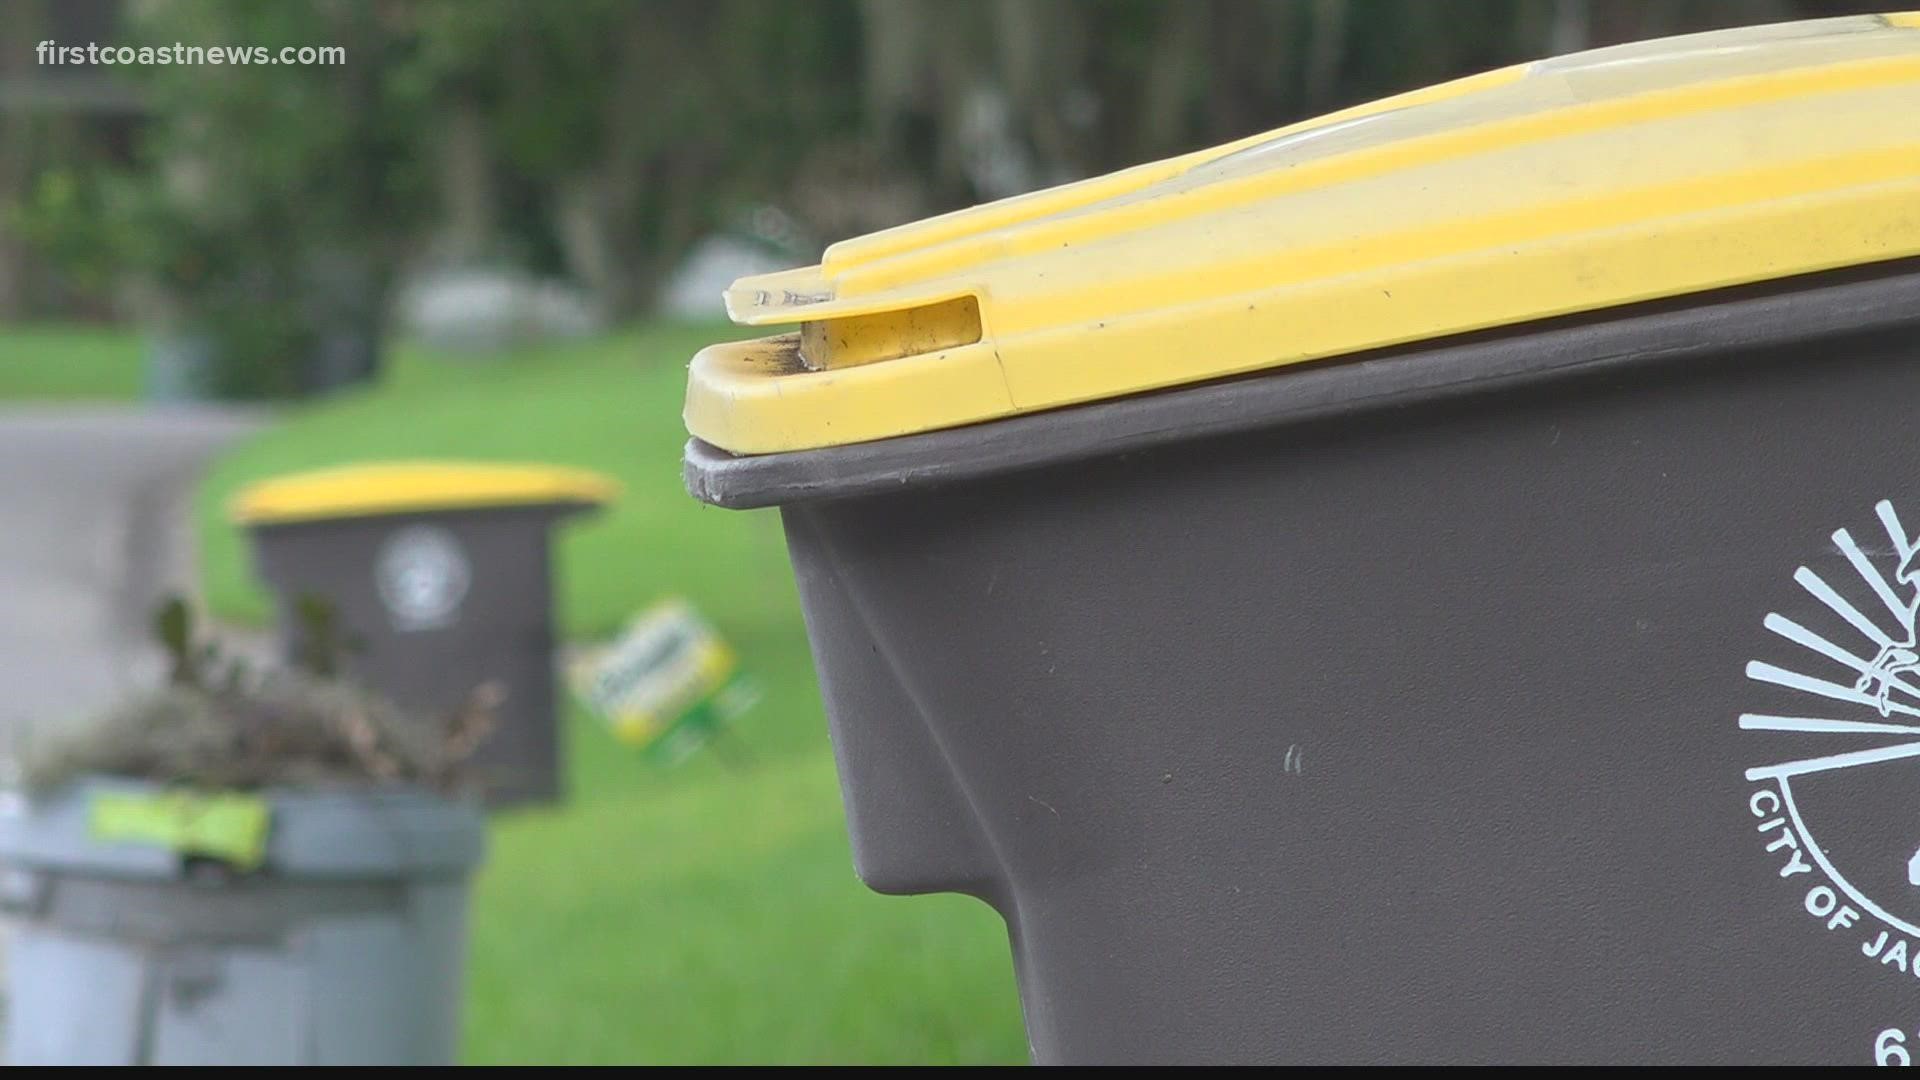 The city made the decision to suspend recycling collection to focus on yard waste collection.